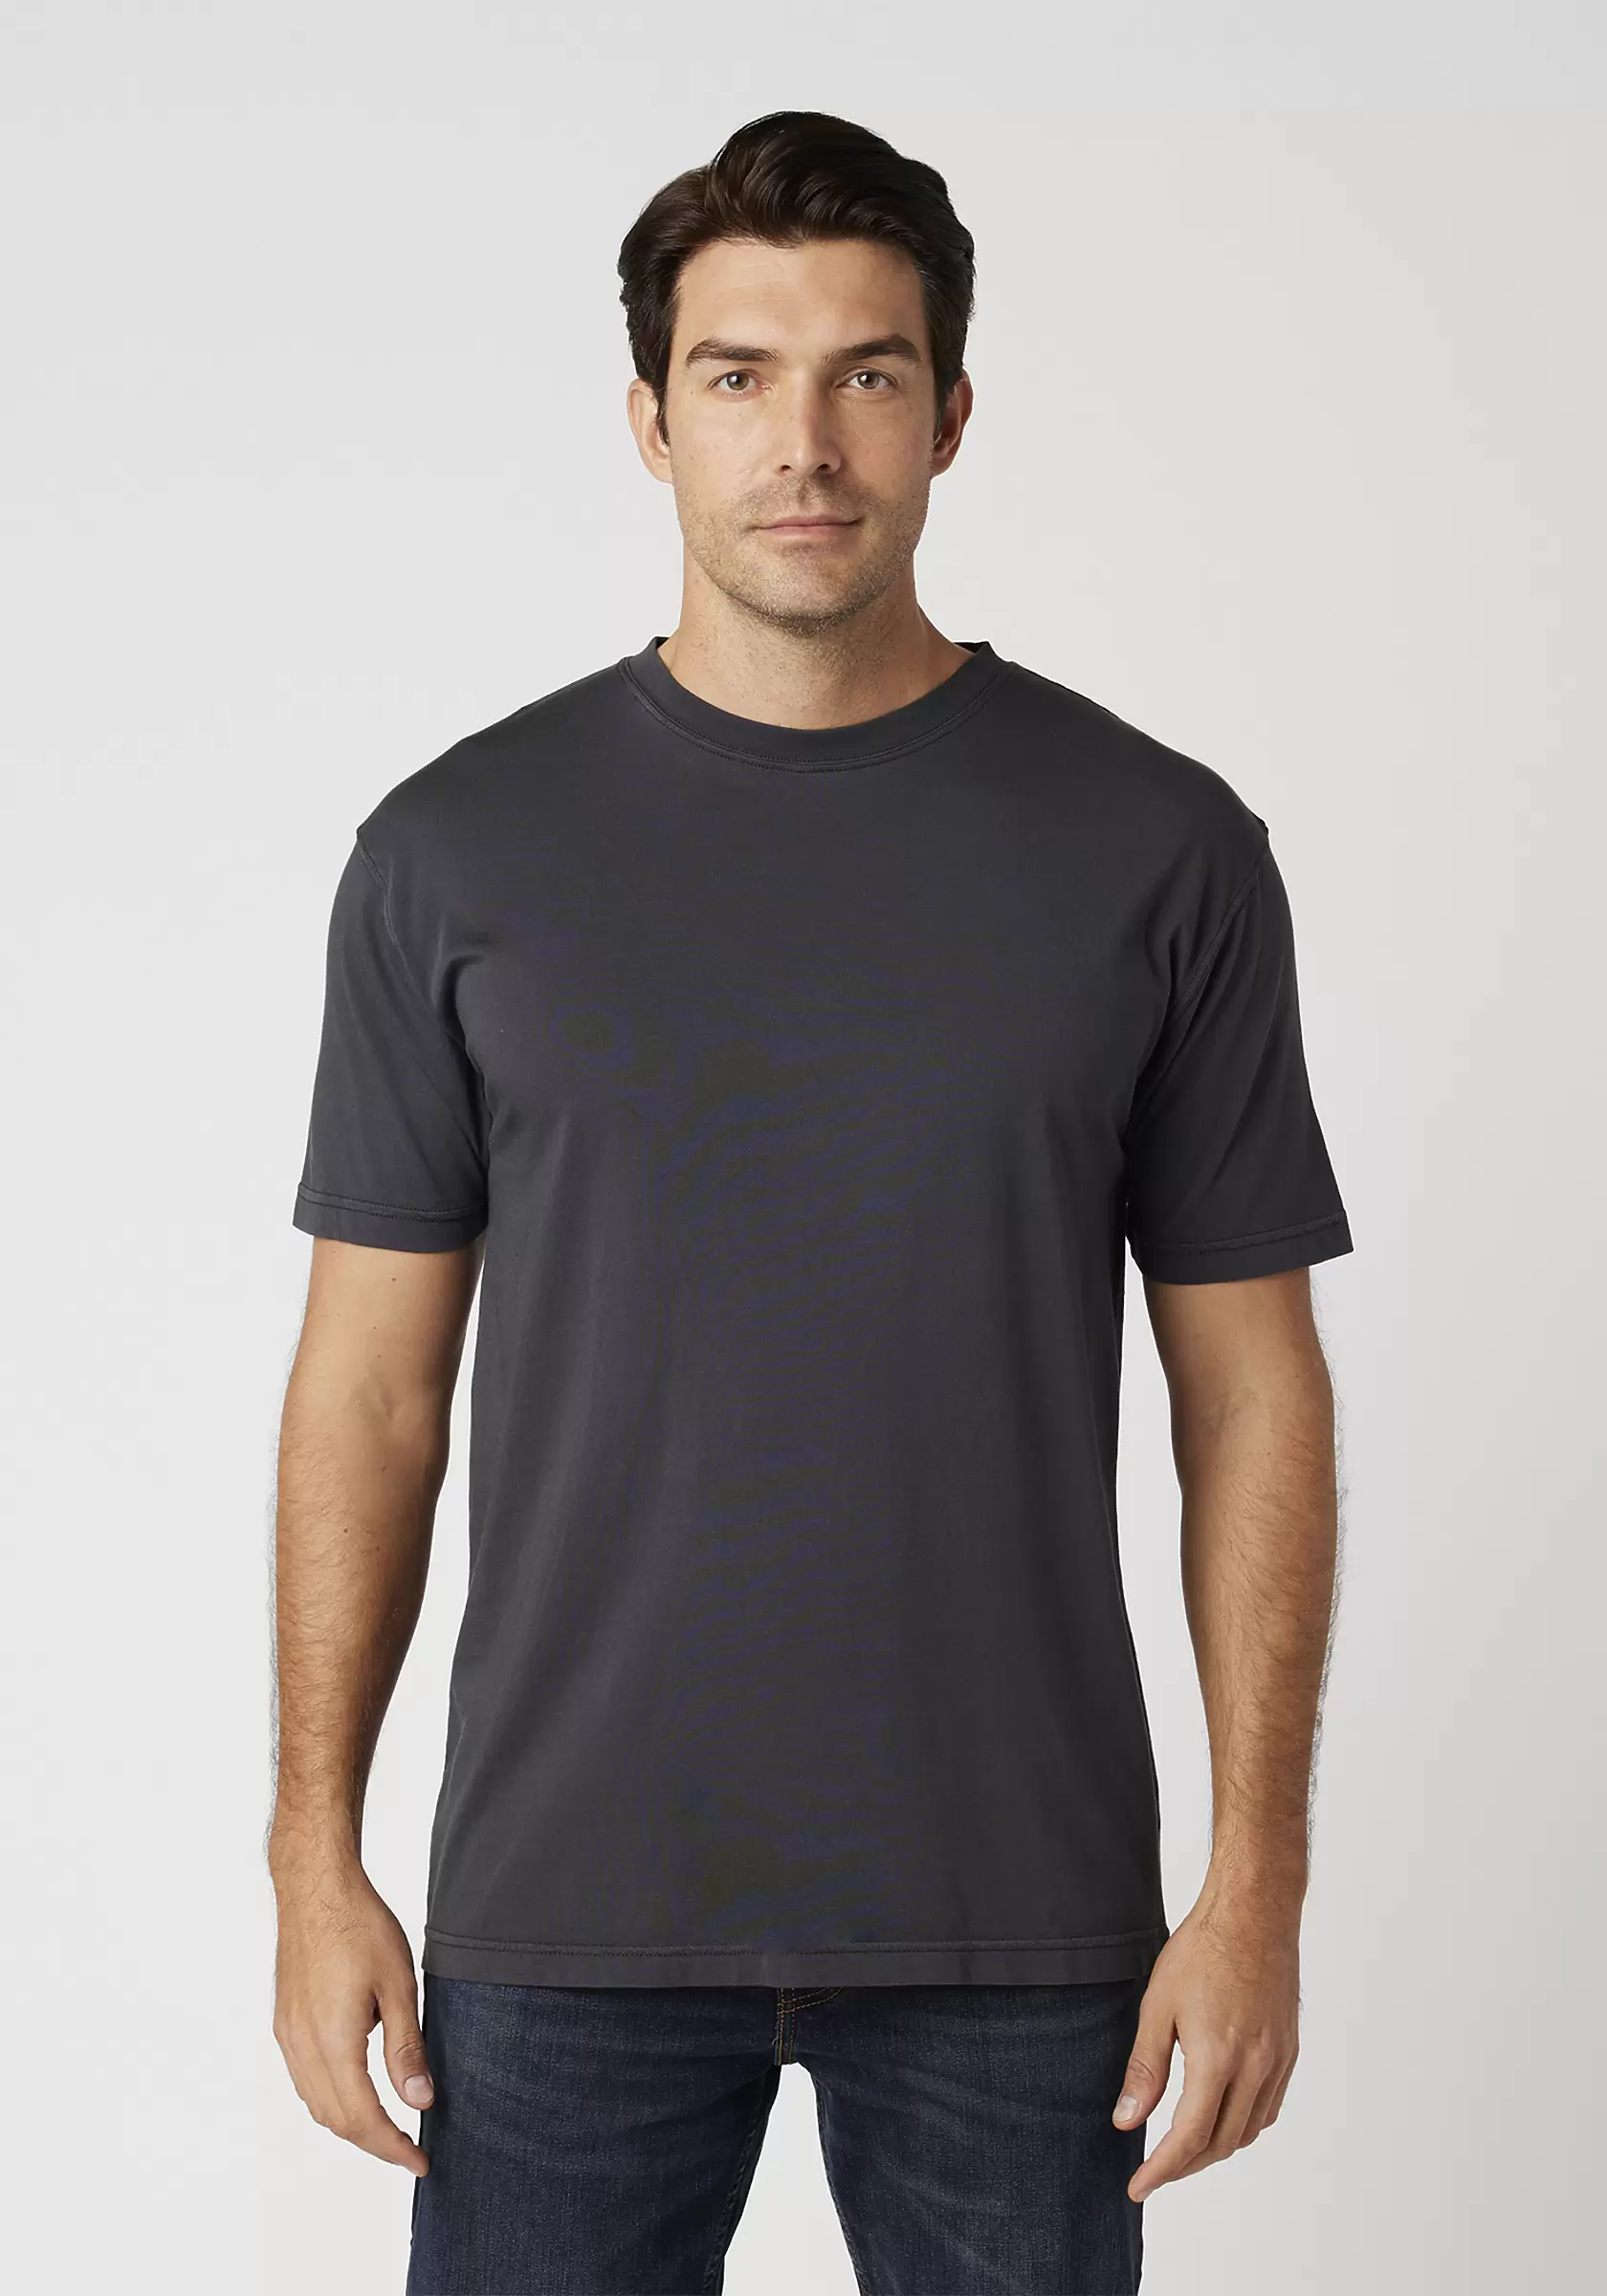 Cotton Heritage OU1690 Garment Dye Short Sleeve Pirate Black - From $7.12